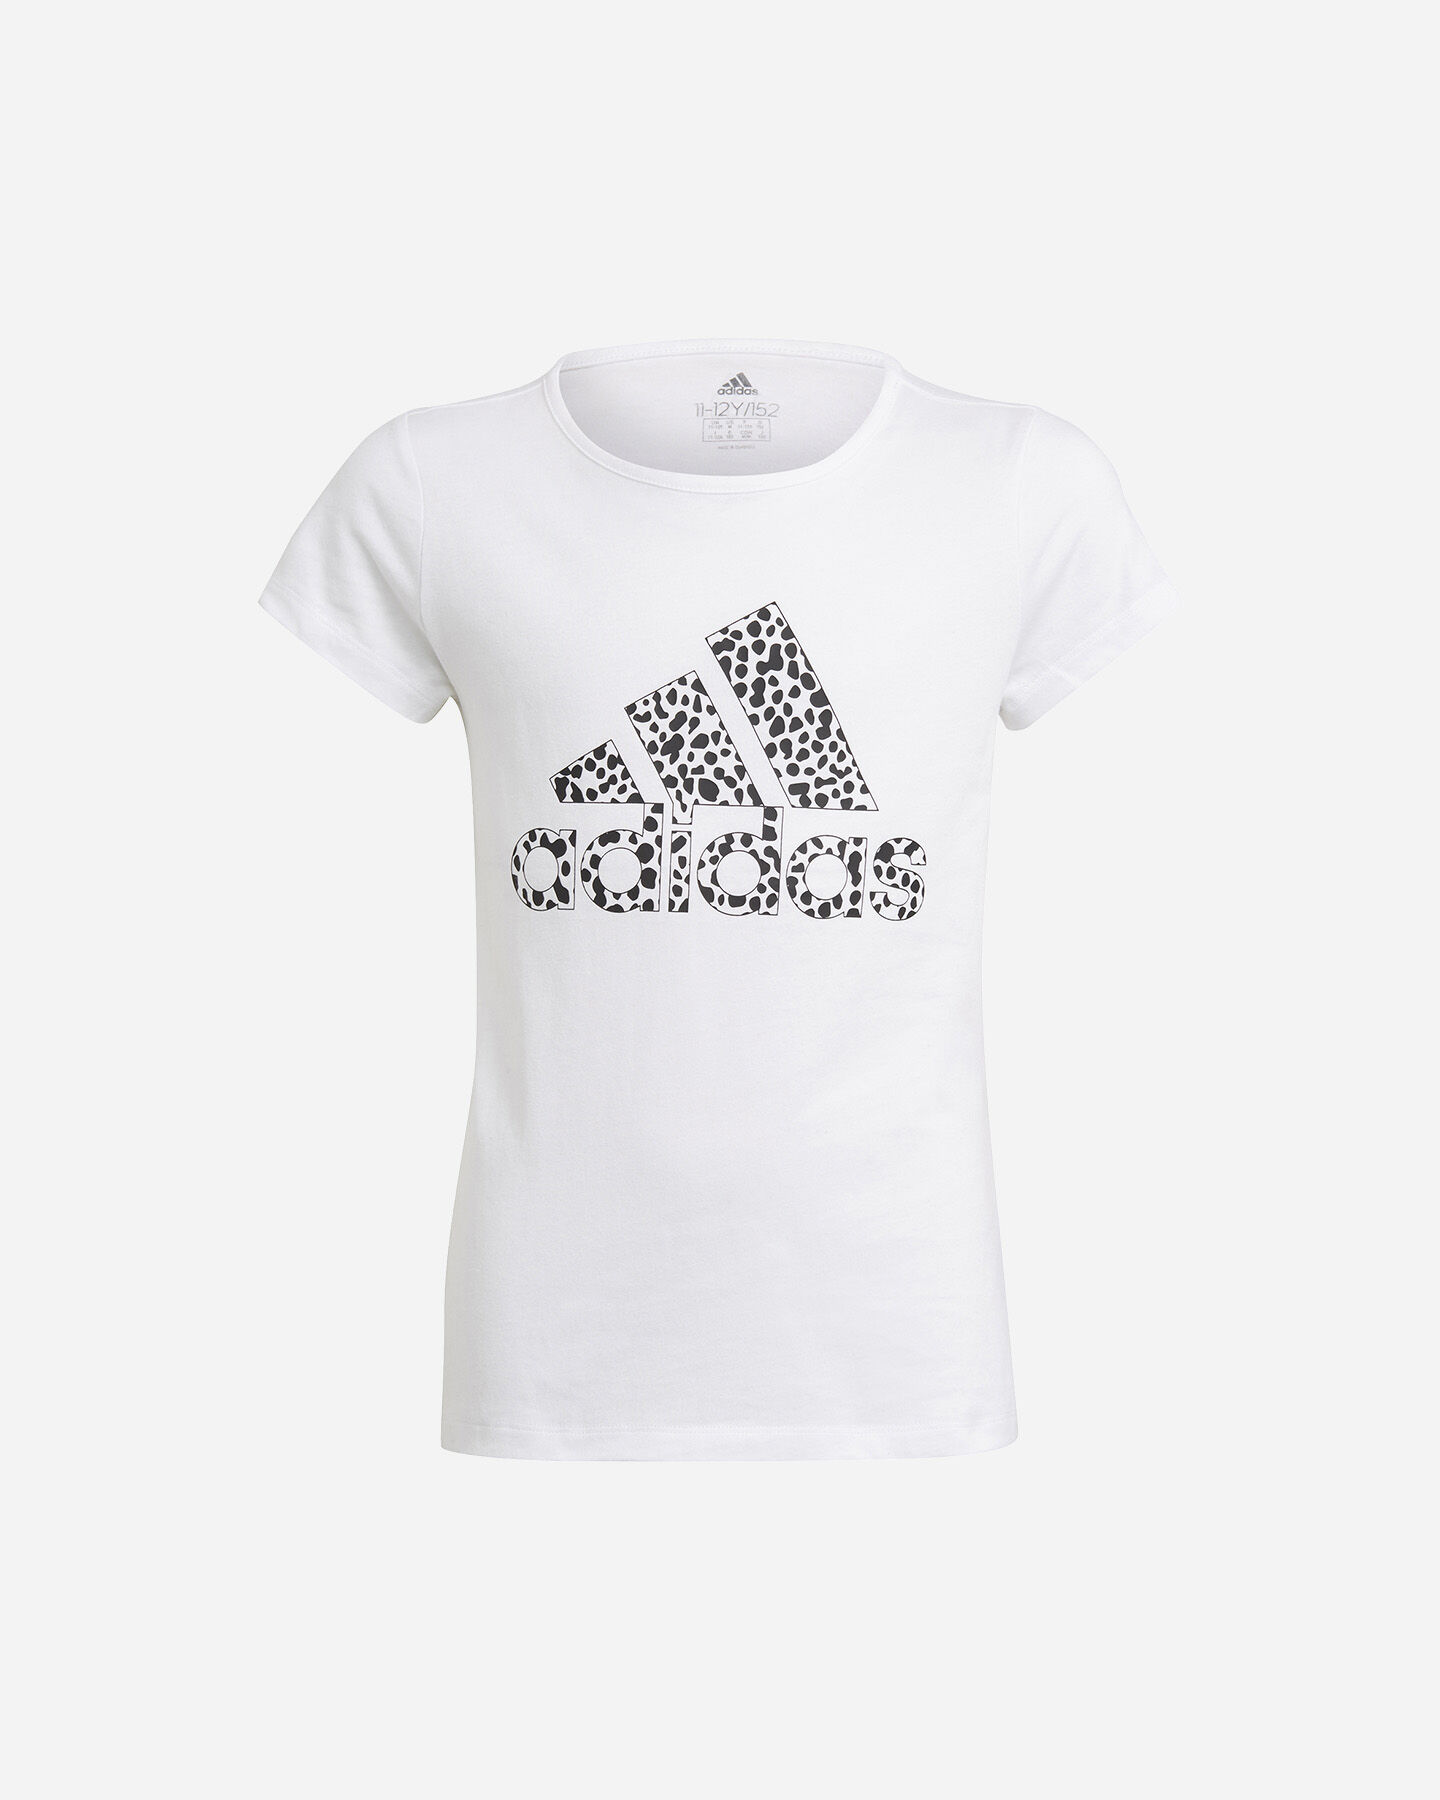  T-Shirt ADIDAS GRAPHIC JR S5276348|UNI|7-8A scatto 0